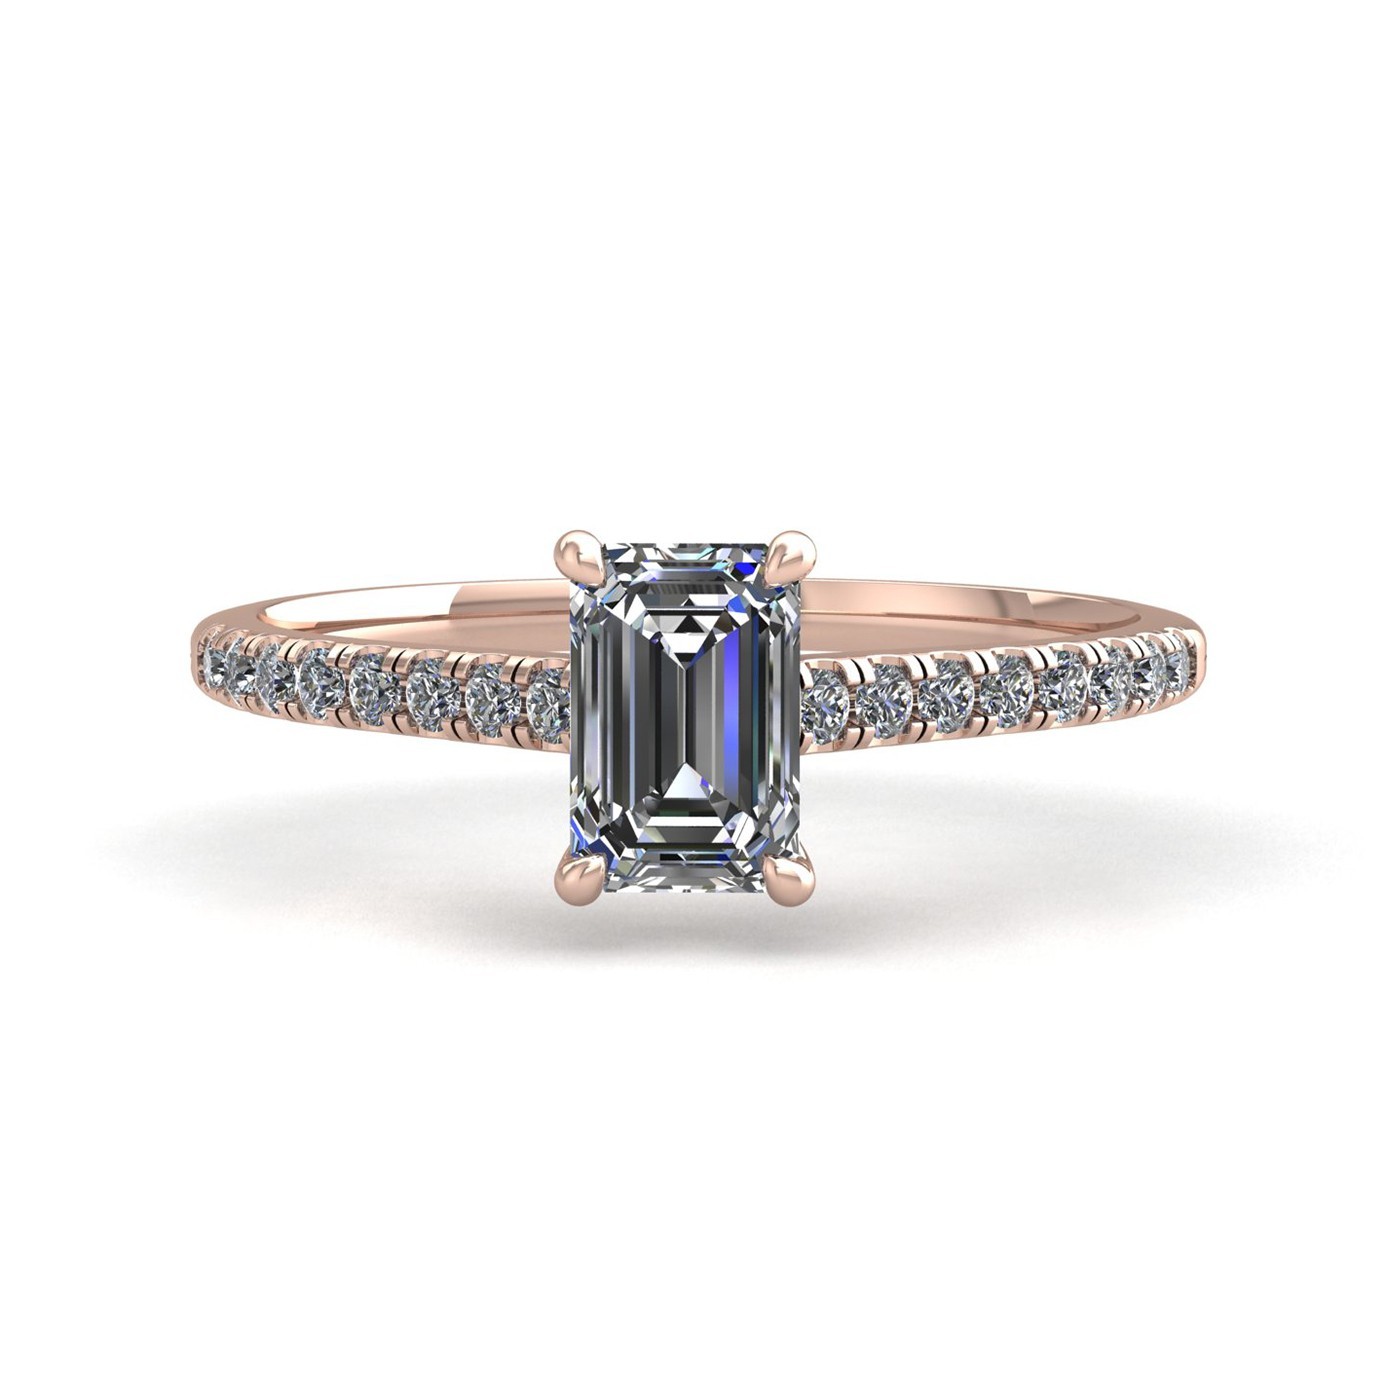 18k rose gold 1.5ct 4 prongs emerald cut diamond engagement ring with whisper thin pavÉ set band Photos & images